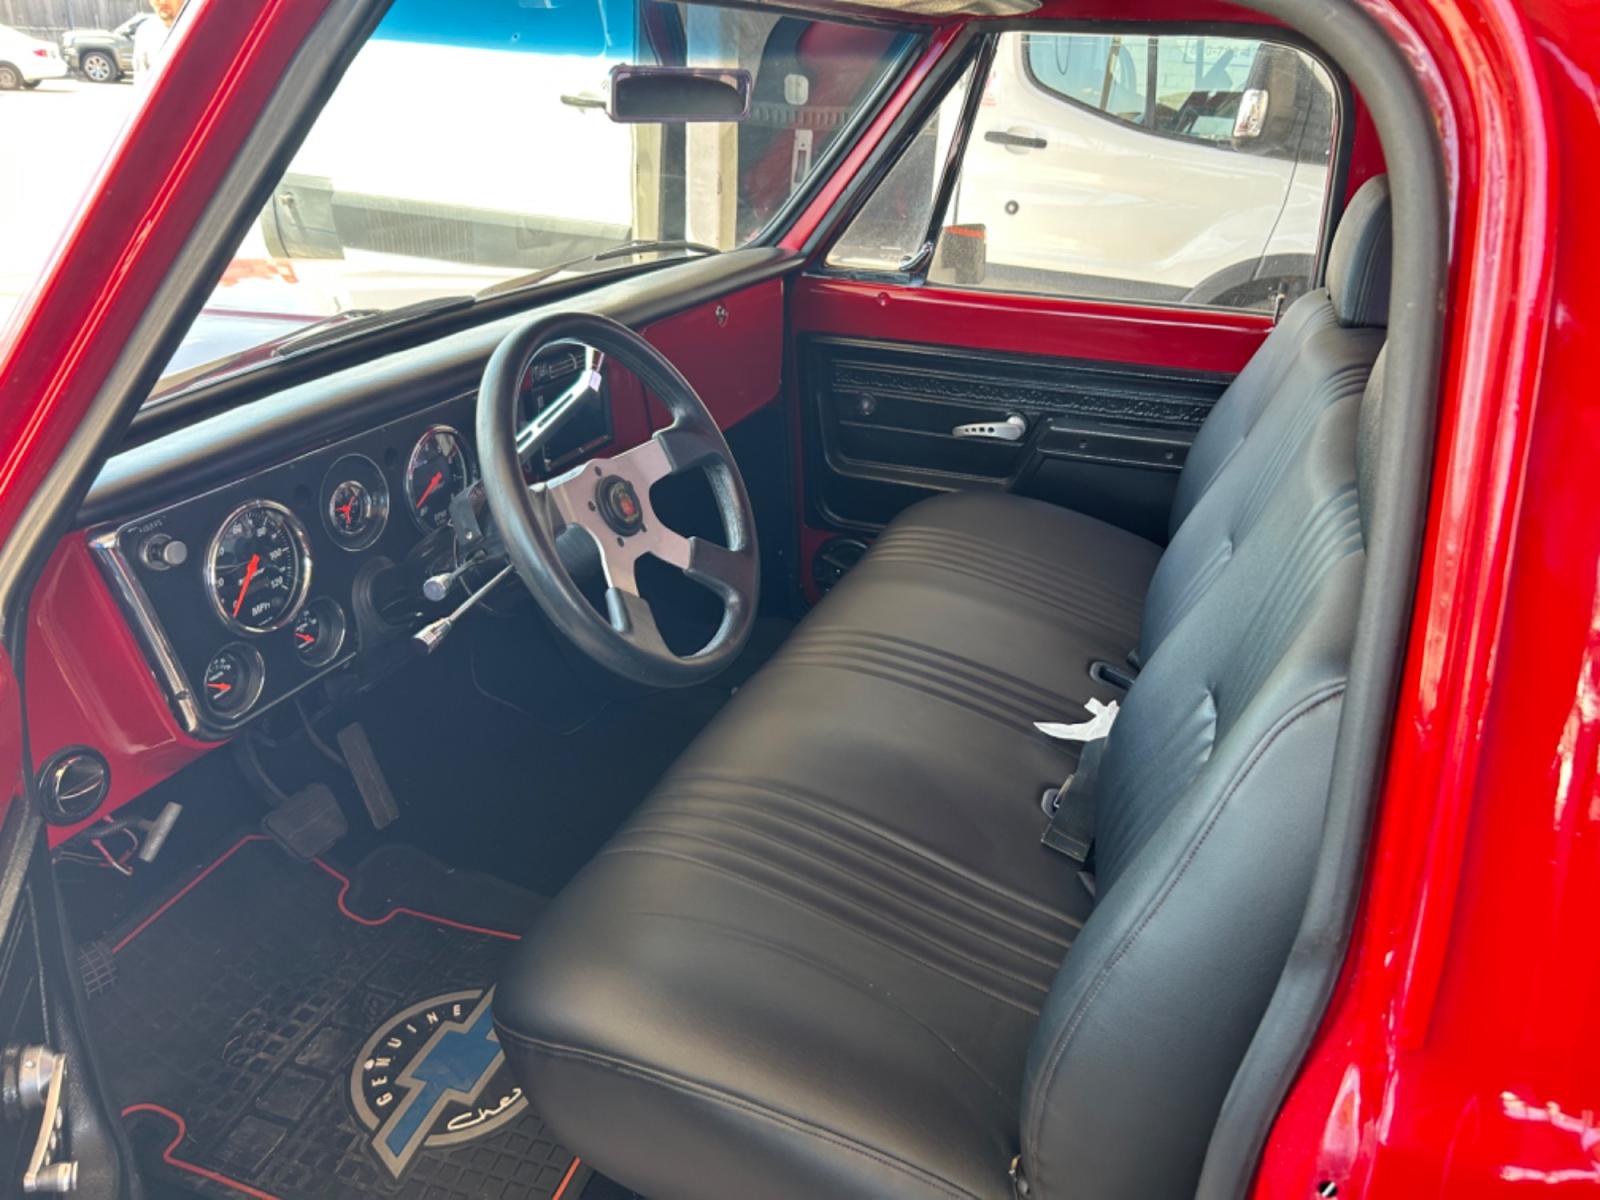 1972 Red Chevrolet C10 (CCE142A1201) , Automatic transmission, located at 1687 Business 35 S, New Braunfels, TX, 78130, (830) 625-7159, 29.655487, -98.051491 - 580 Horse Power - Photo #7